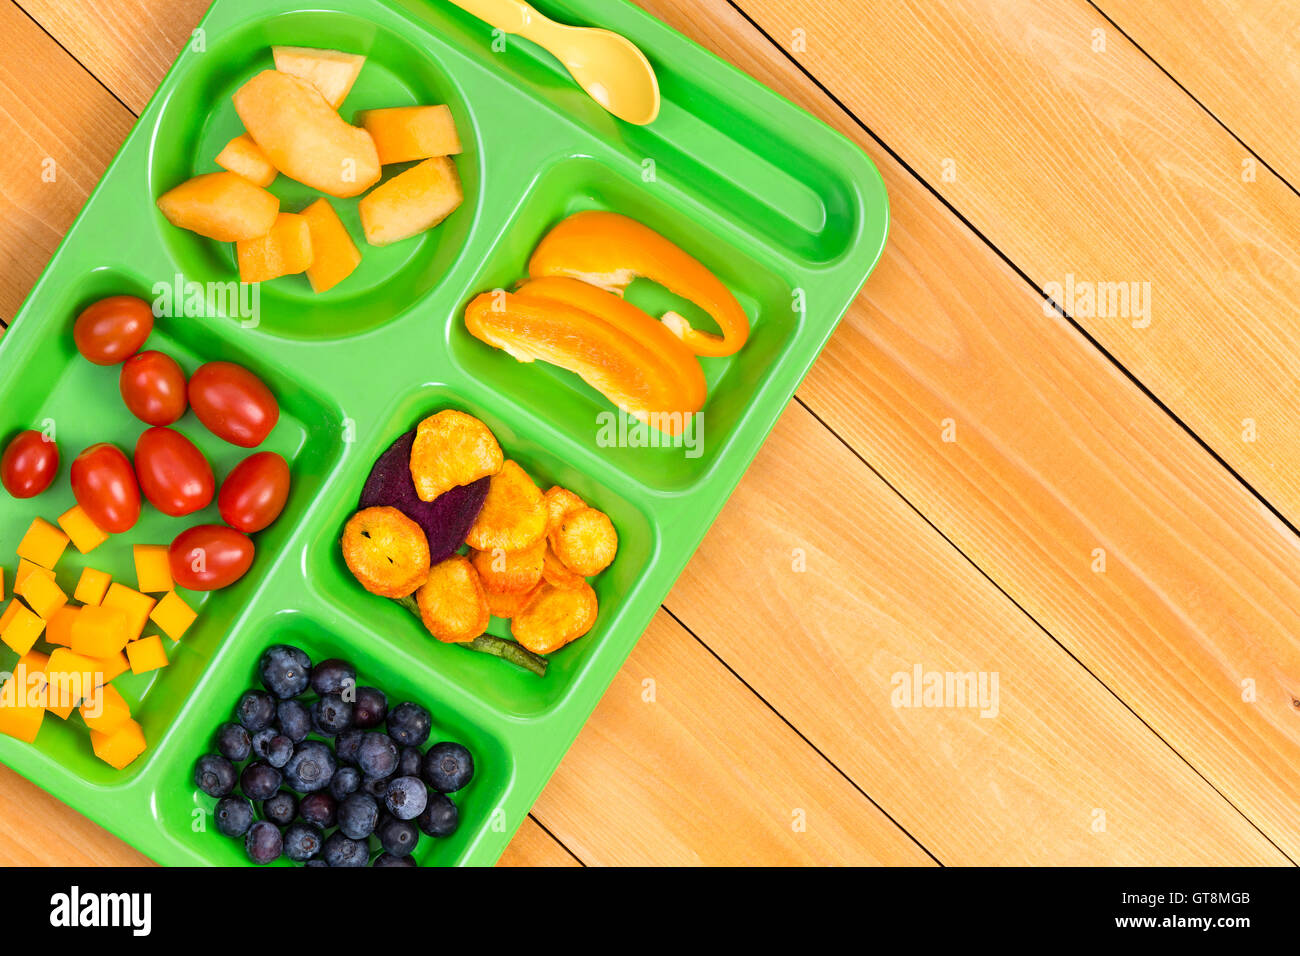 Child size lunch tray with cherry tomatoes, melon, blueberries and sweet pepper fruit on wooden table Stock Photo